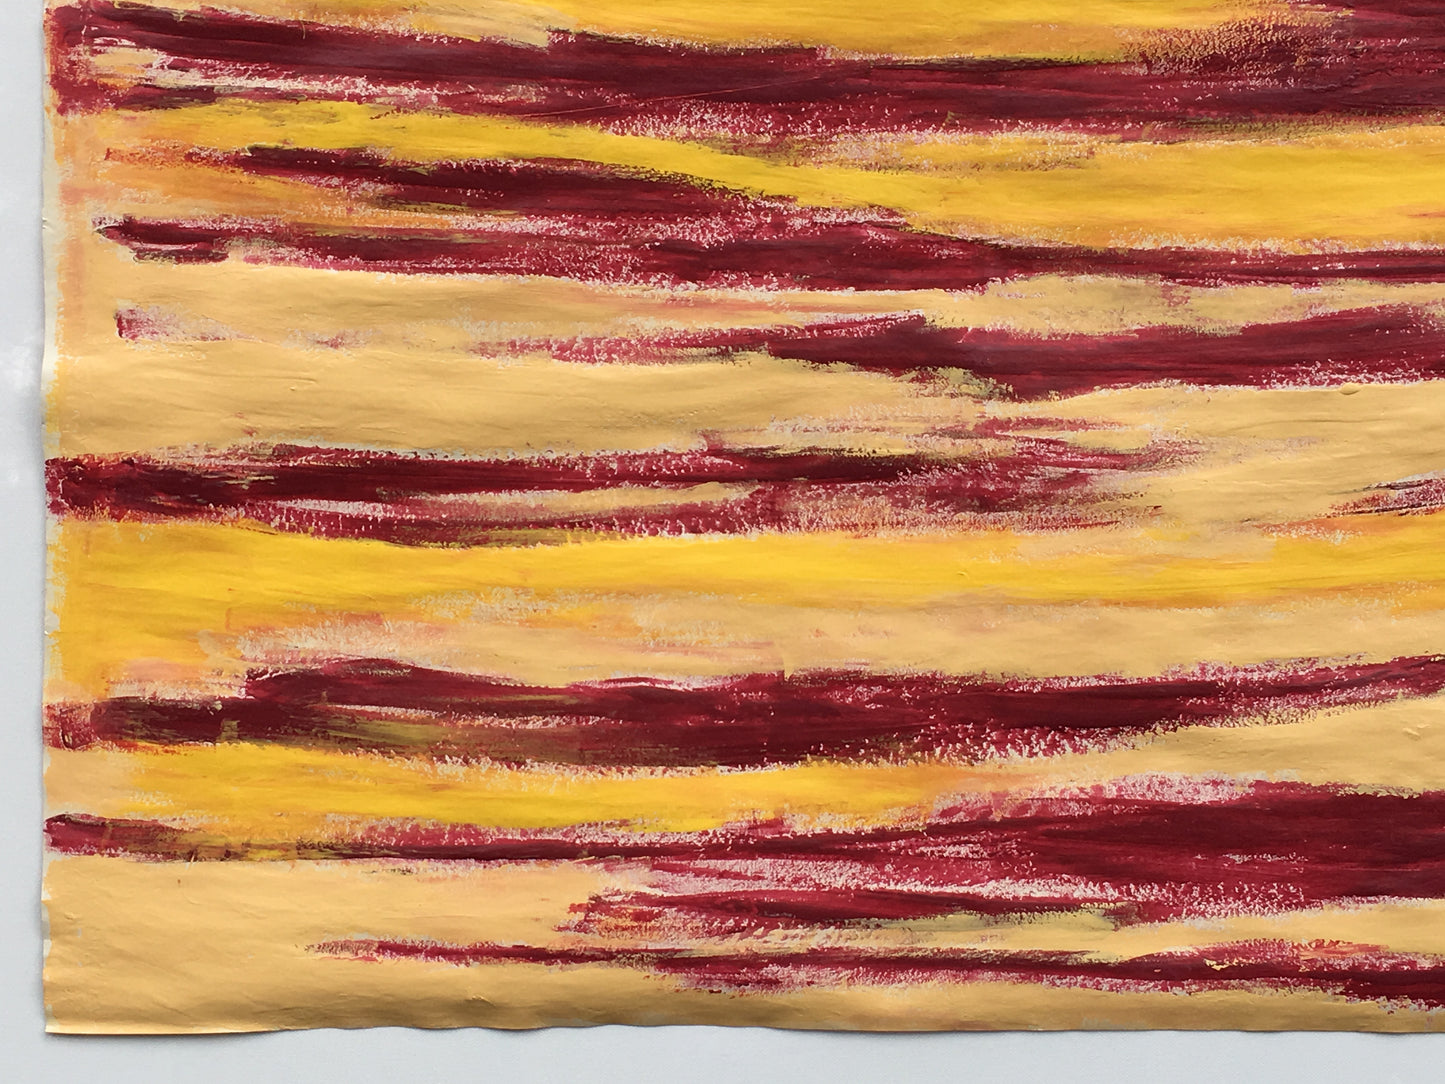 [SOLD] Abstract Red & Yellow Streak Painting on Paper